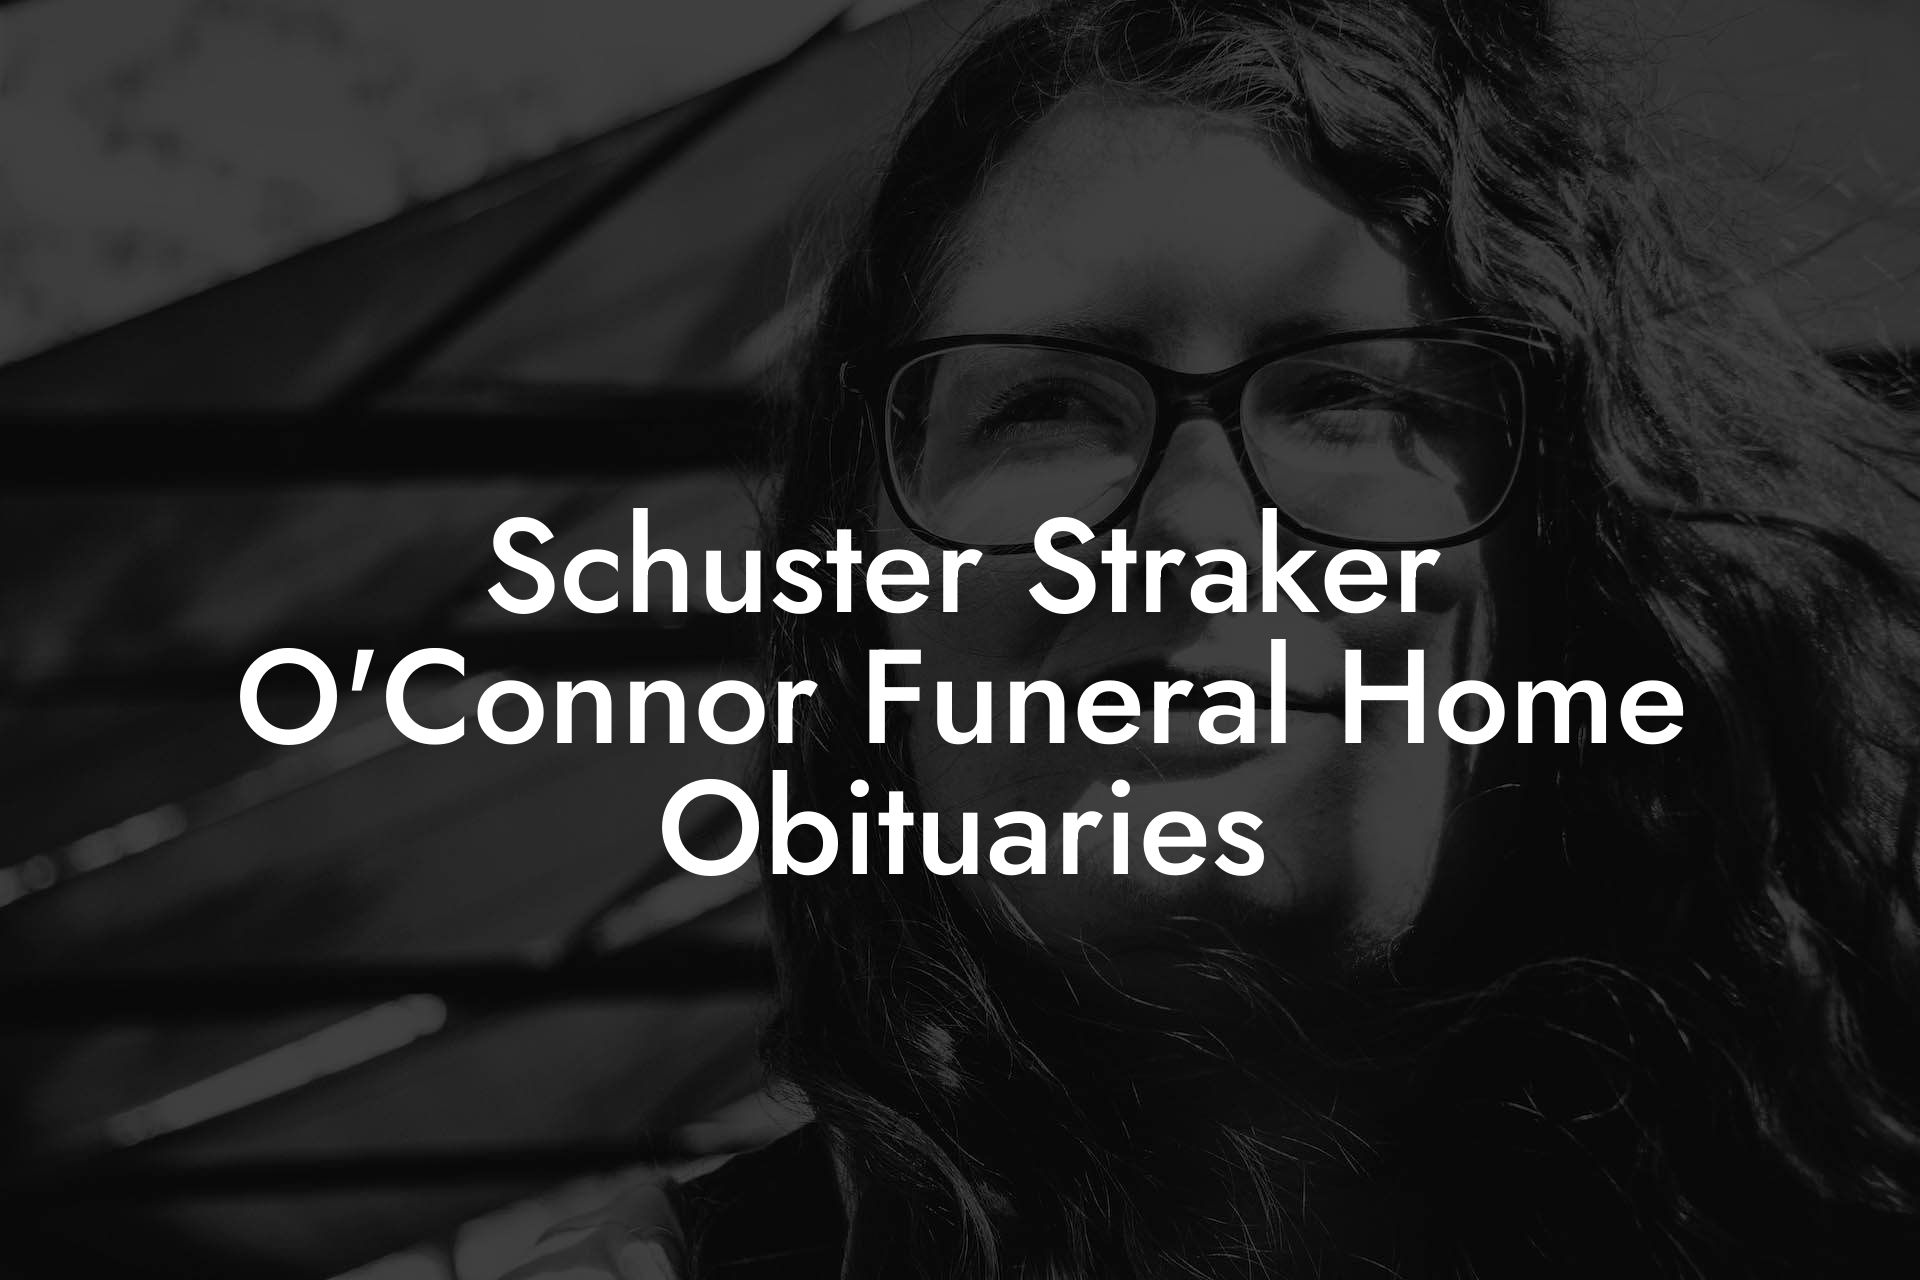 Schuster Straker O'Connor Funeral Home Obituaries